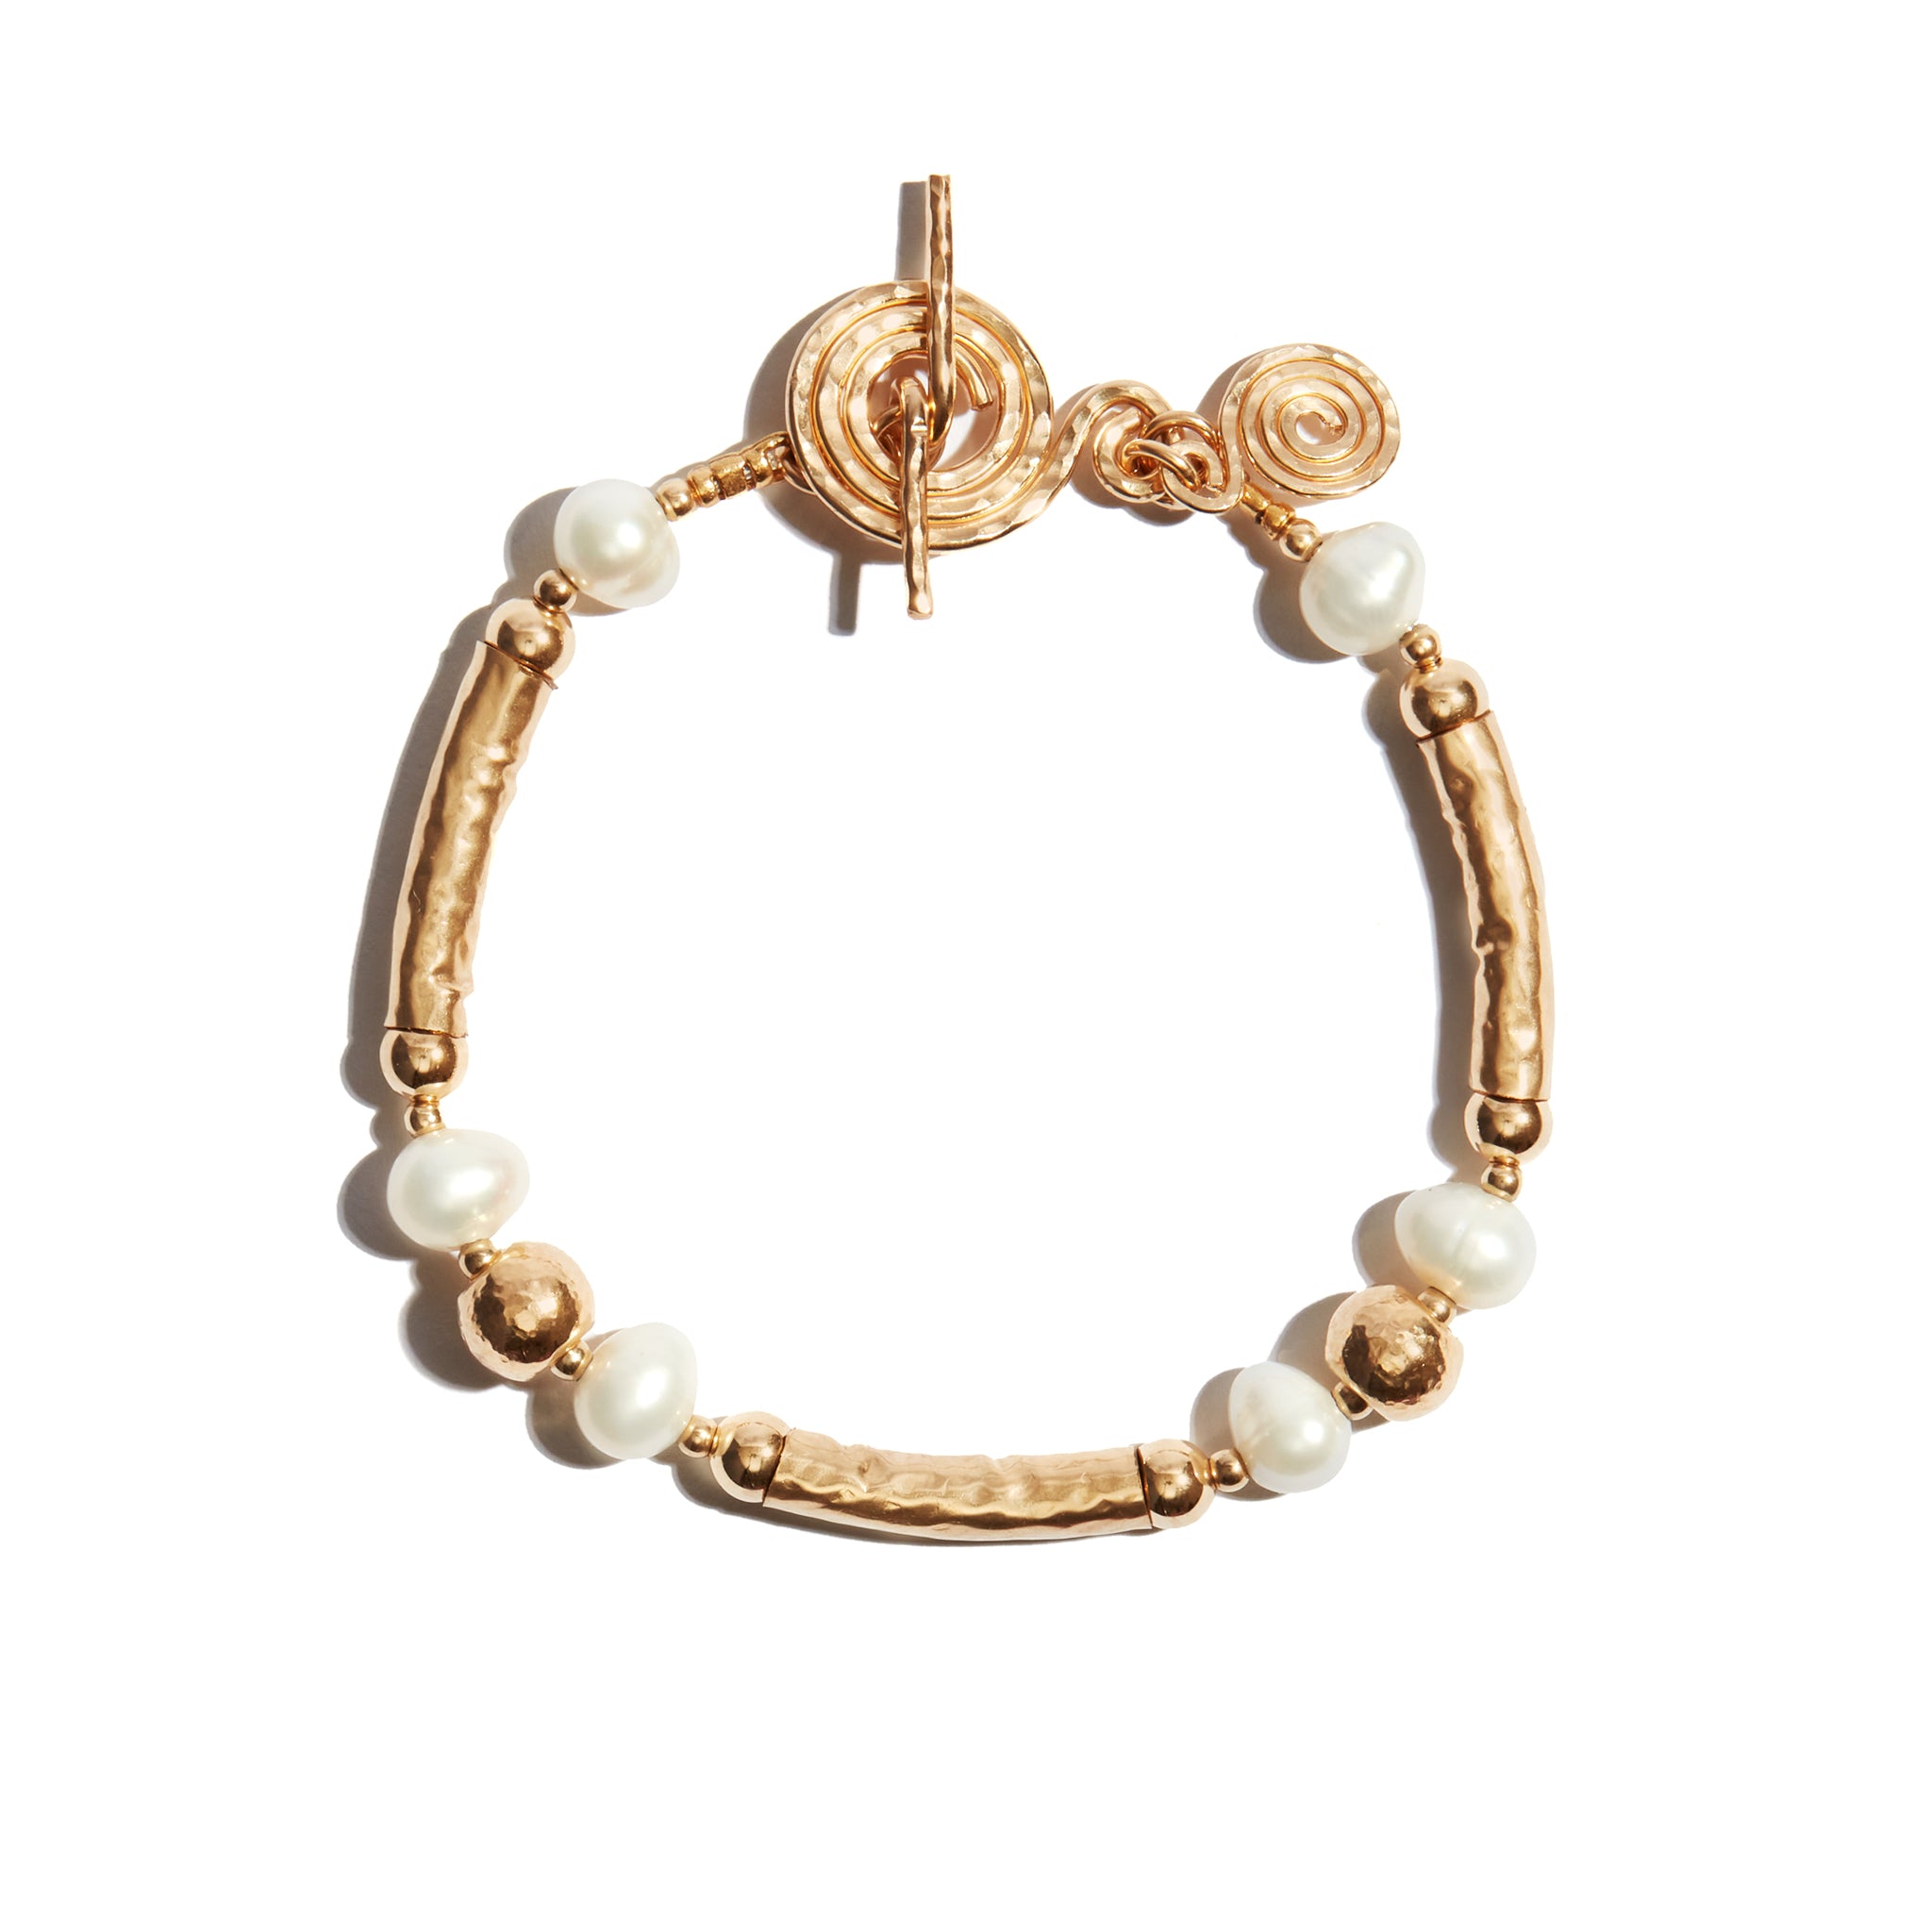 Stunning 14k gold-filled bracelet adorned with hammered gold bars, beads, and pearls, perfect for adding elegance to any outfit.